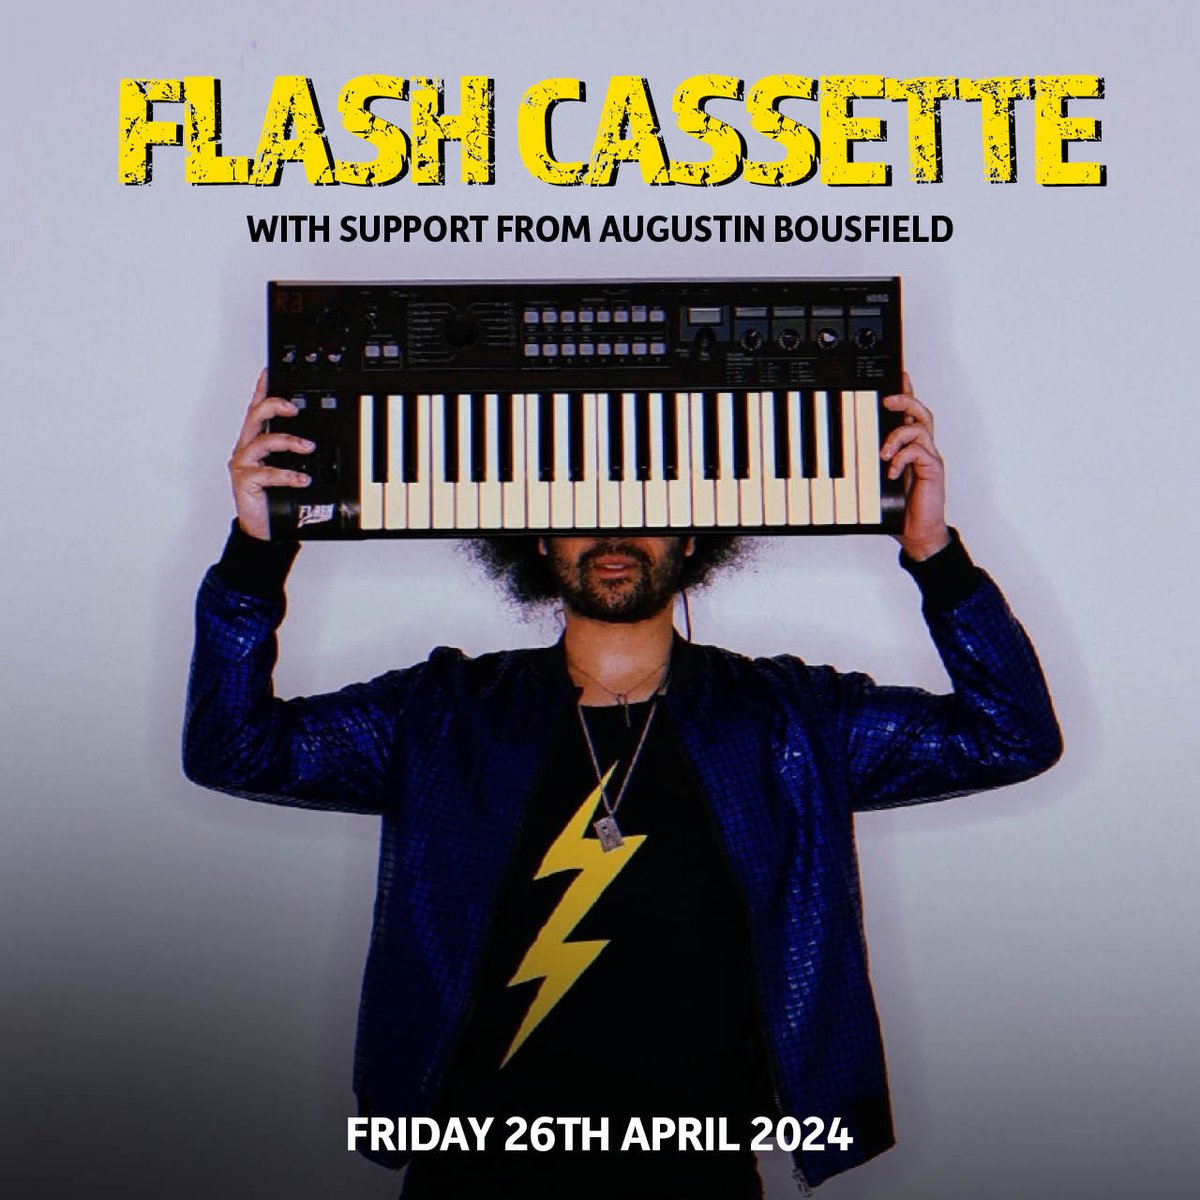 3 gigs in a row this weekend. This solo is the first @ParishHudd with the marvellous @flashcassette . @gurglesband album launch Sat and supporting the ace @MorriconePaul for his album launch on Sunday.